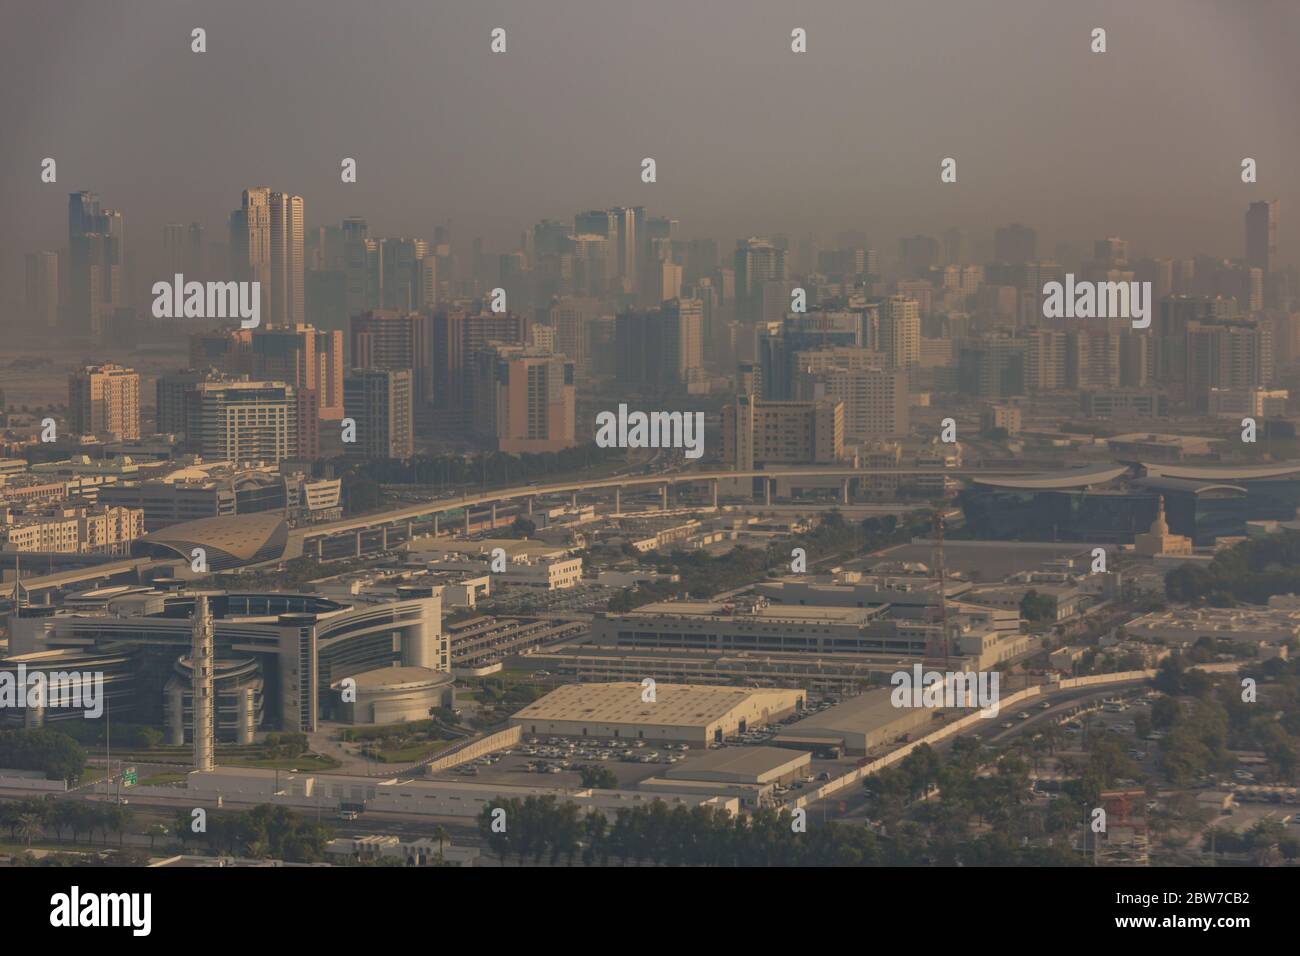 DUBAI, UAE - APRIL 29: Aerial view of Downtown Dubai and skyscrapers  during morning sandstorm. Highway and trainline, soft light over the sand Stock Photo